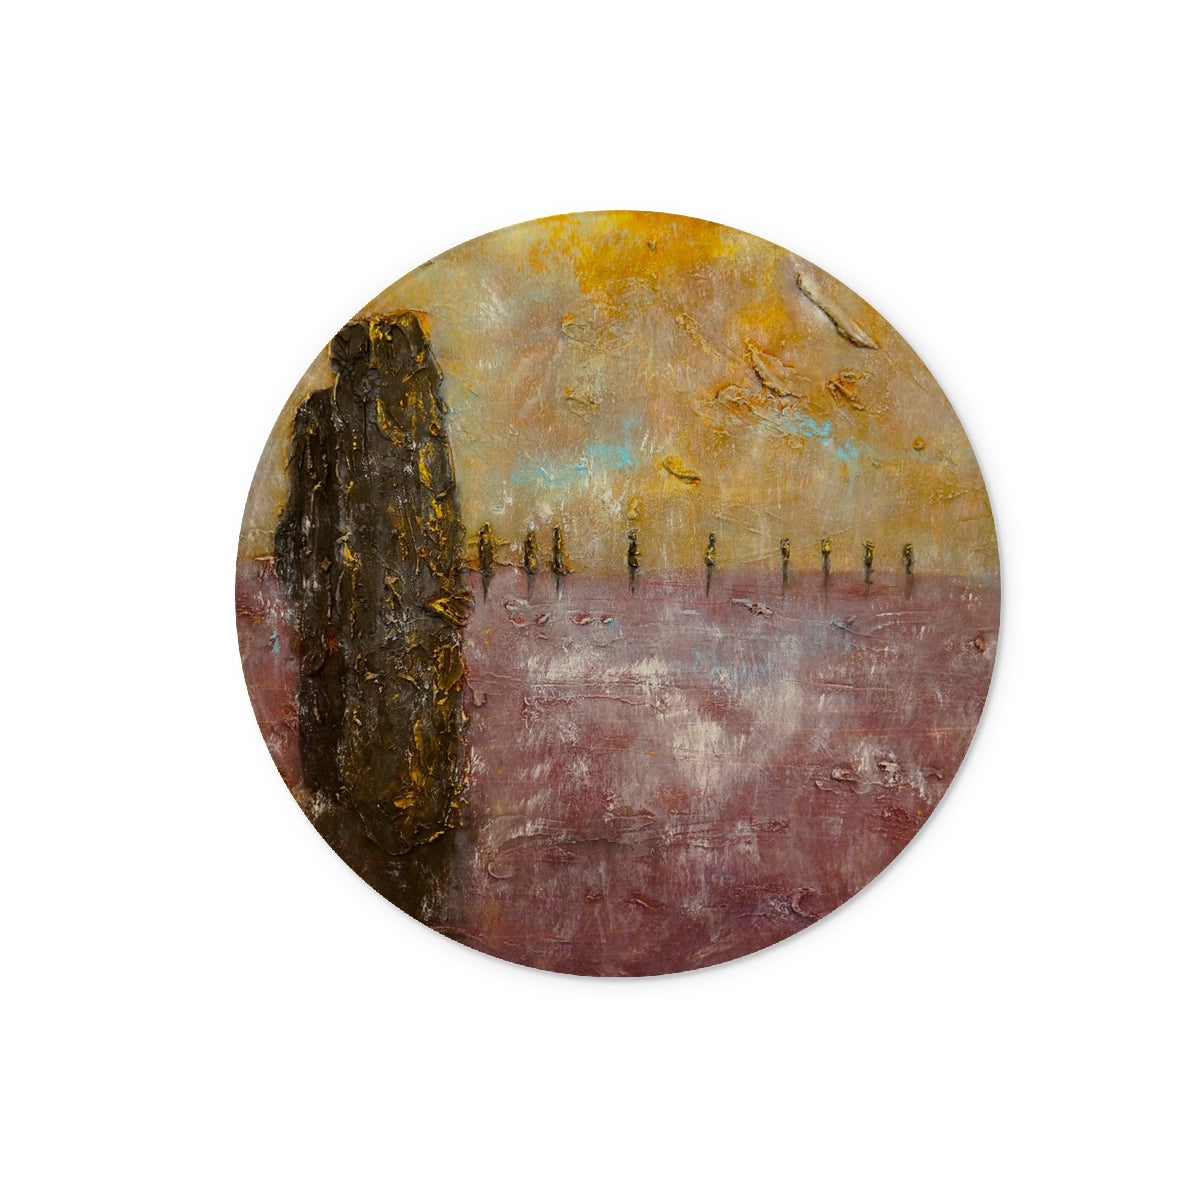 Brodgar Mist Orkney Art Gifts Glass Chopping Board-Glass Chopping Boards-Orkney Art Gallery-12" Round-Paintings, Prints, Homeware, Art Gifts From Scotland By Scottish Artist Kevin Hunter